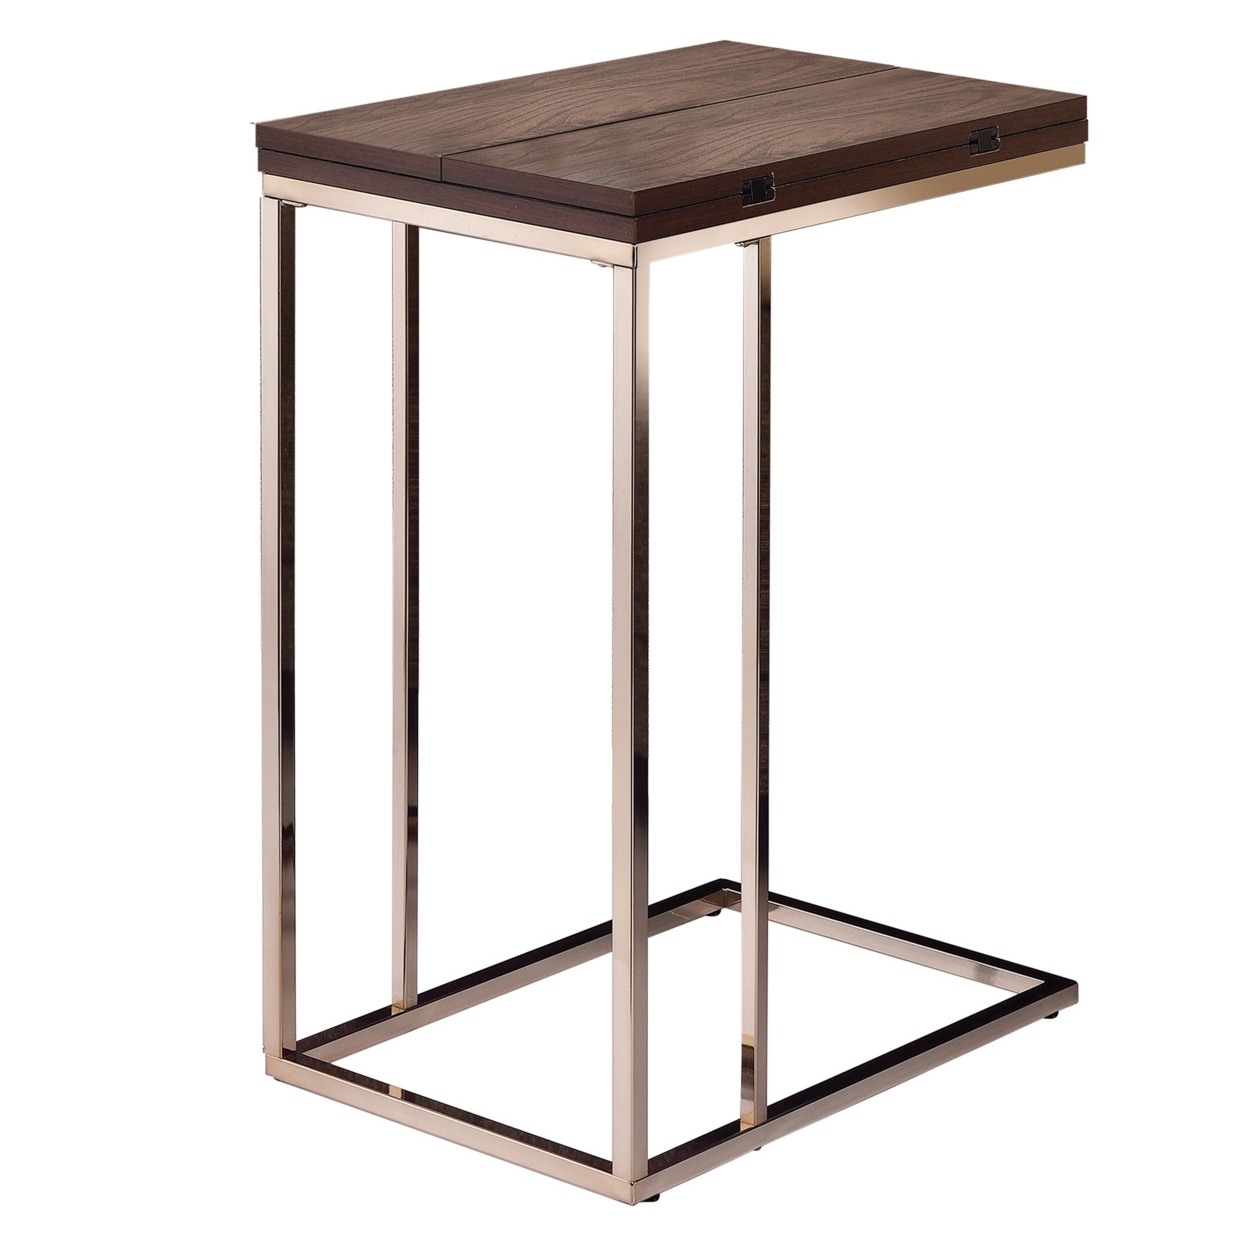 Classic Brown Wooden Top Snack Table With Chrome Legs- Saltoro Sherpi